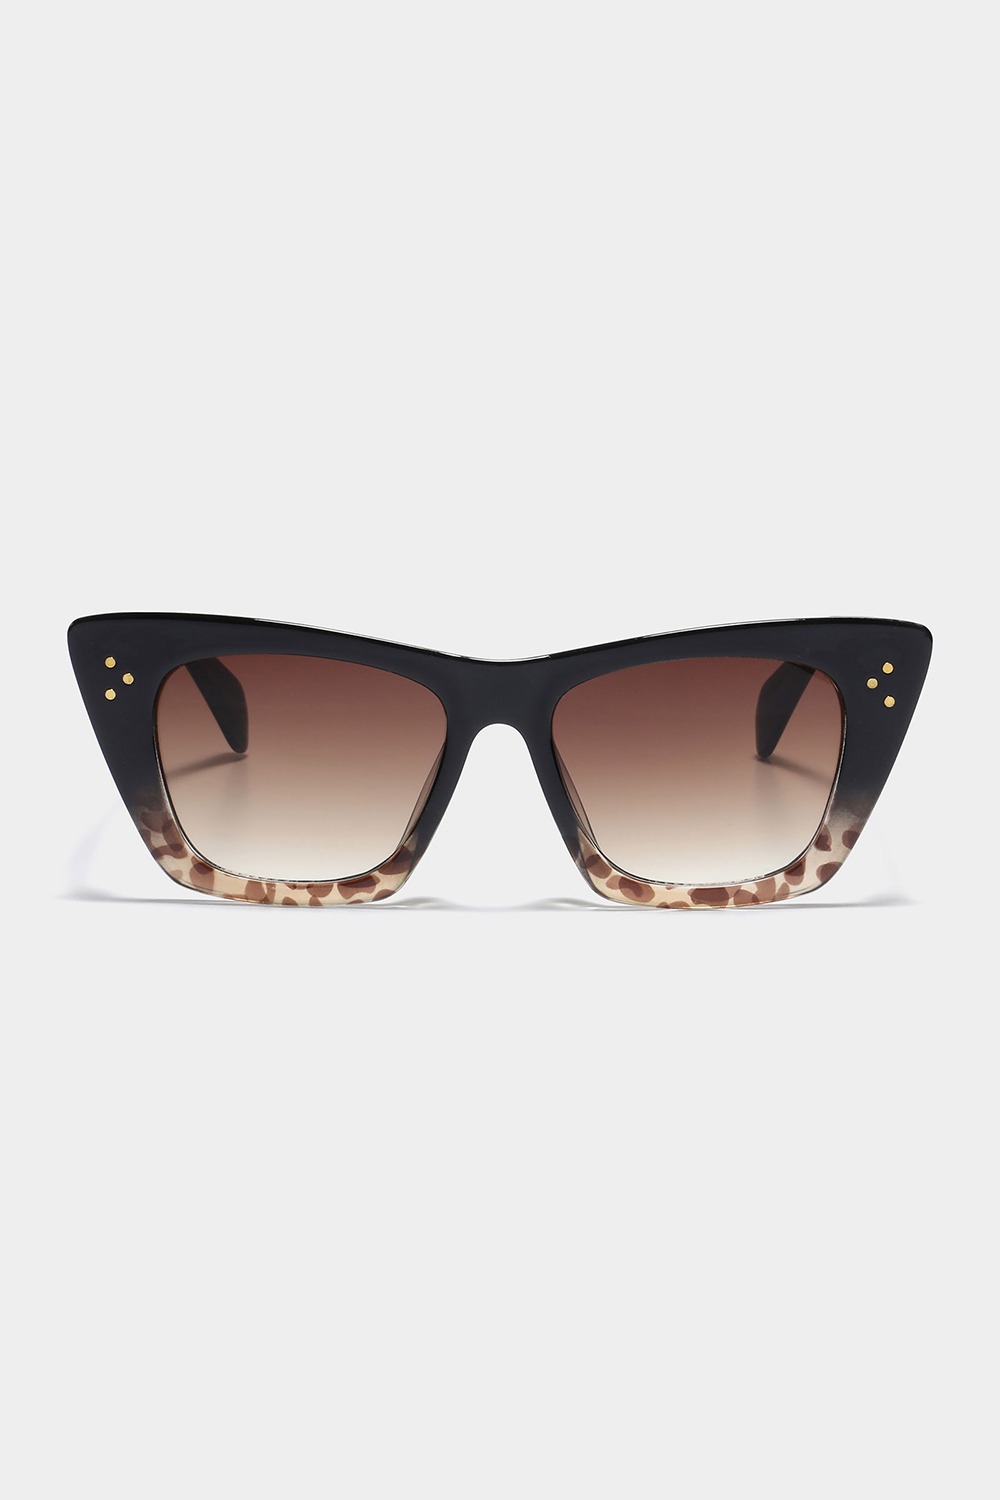 Camilla HE9160 Black with leopard/Gradient brown